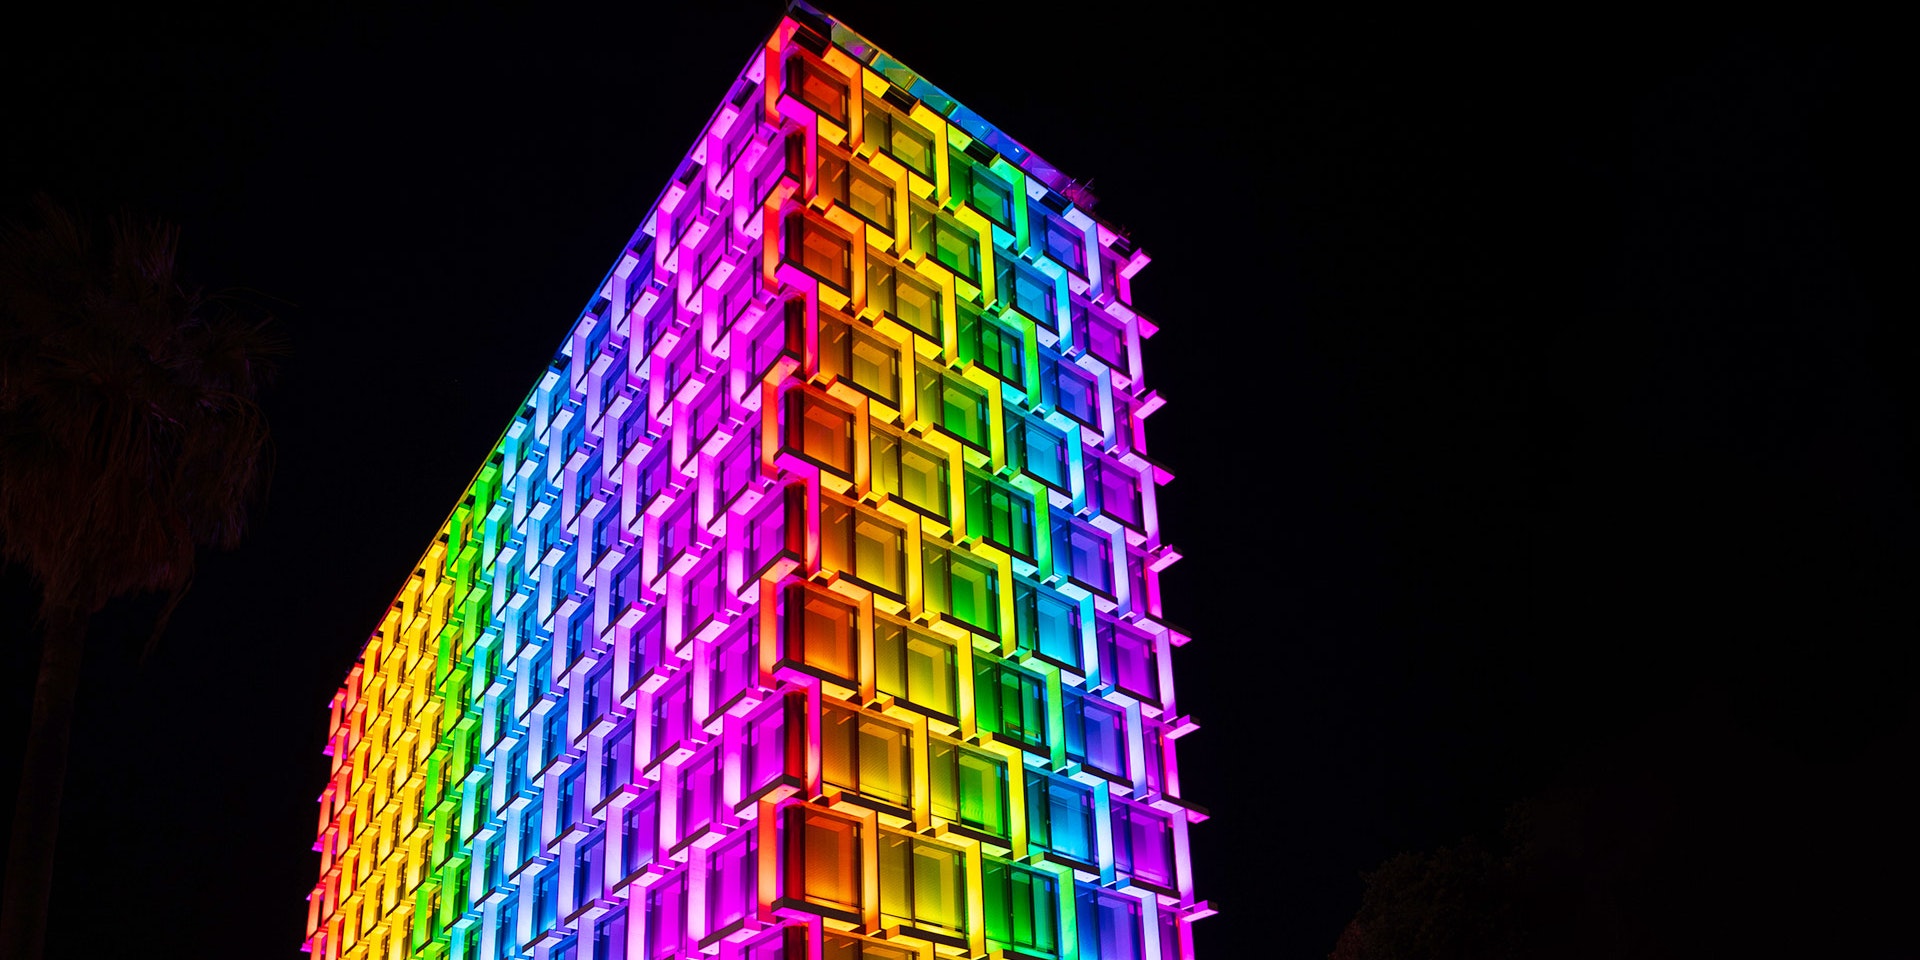 Latitude LED luminaire in application, installed on the facade on Council House in Perth. Colour changing feature is illustrated, the building is illuminated in rainbow colours. 